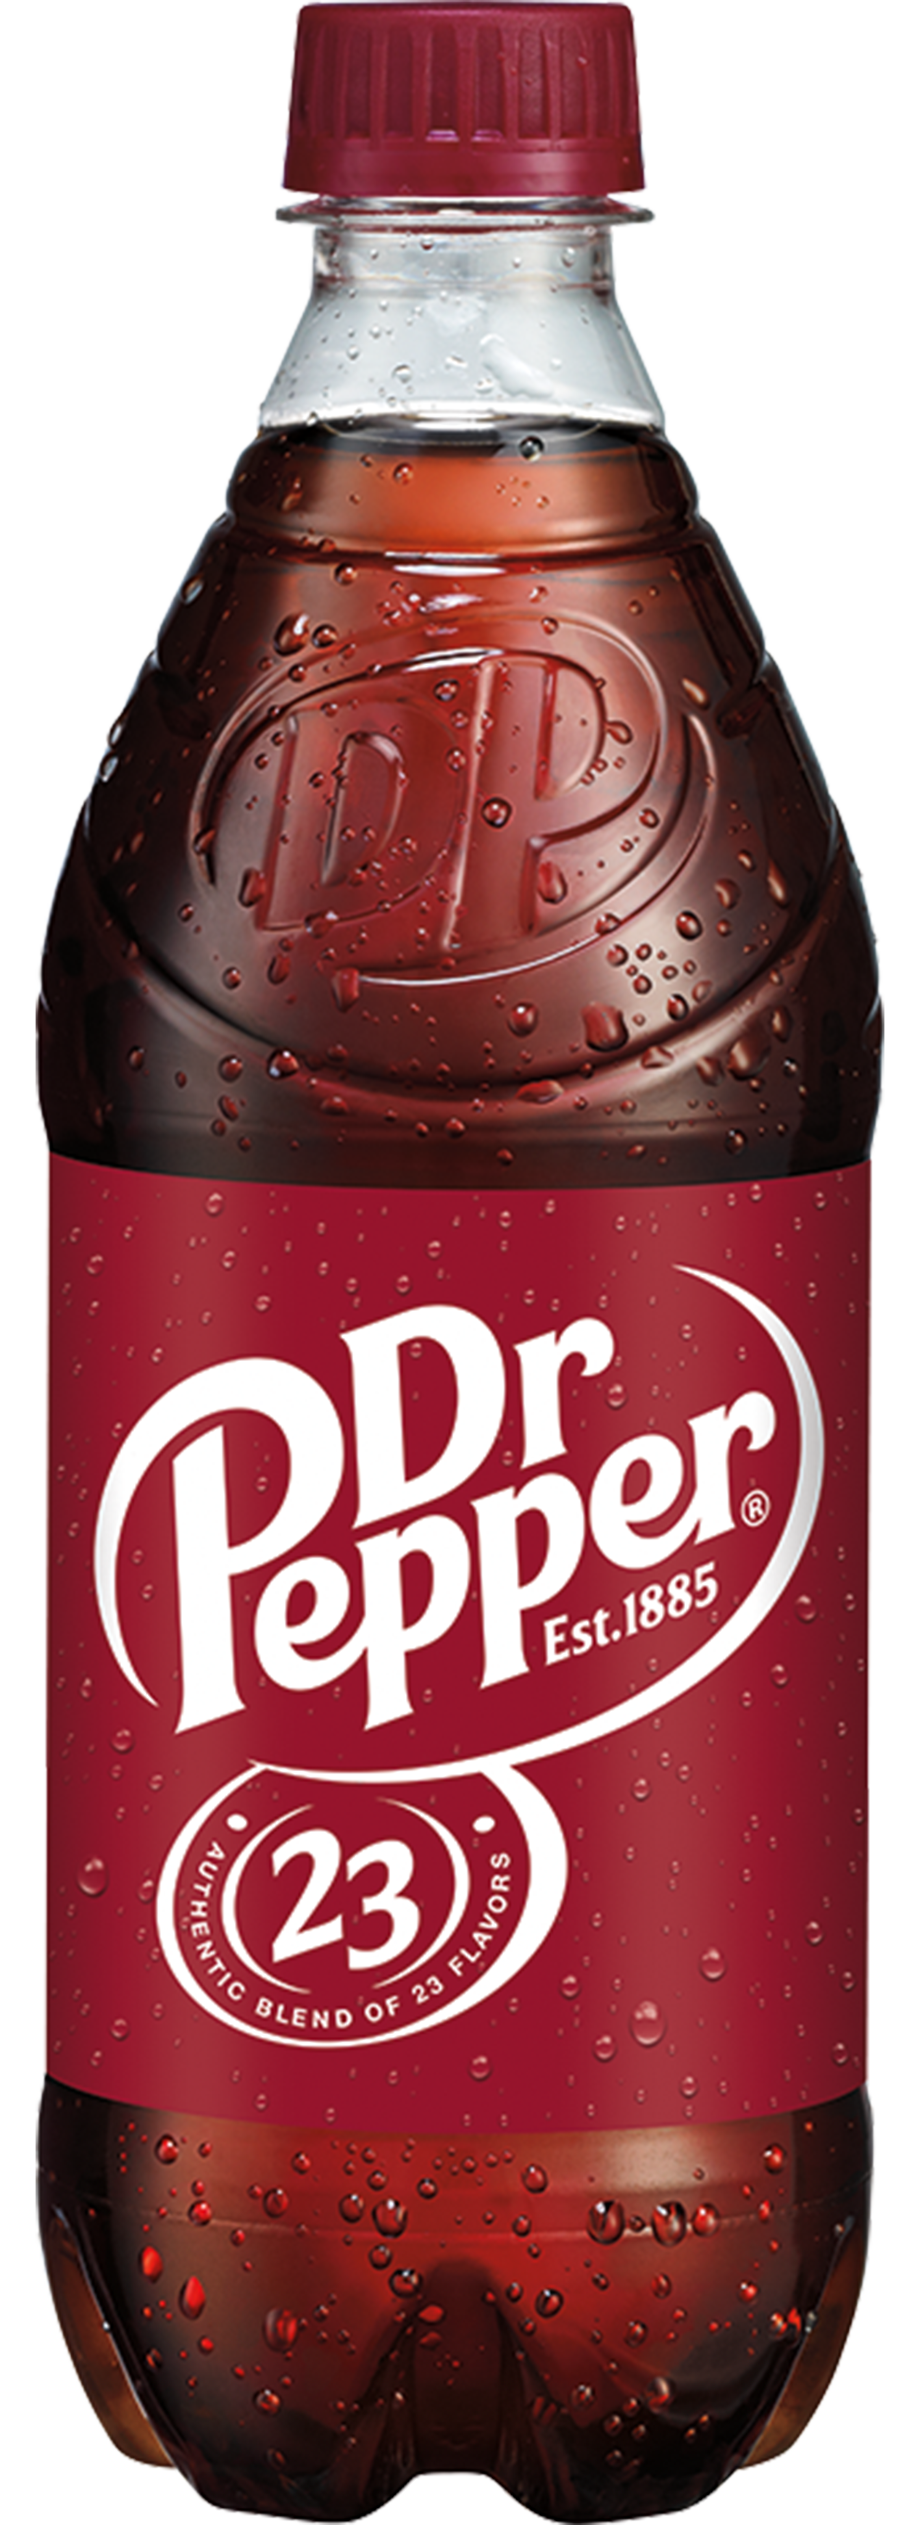 Download High Quality dr pepper logo small Transparent PNG Images - Art